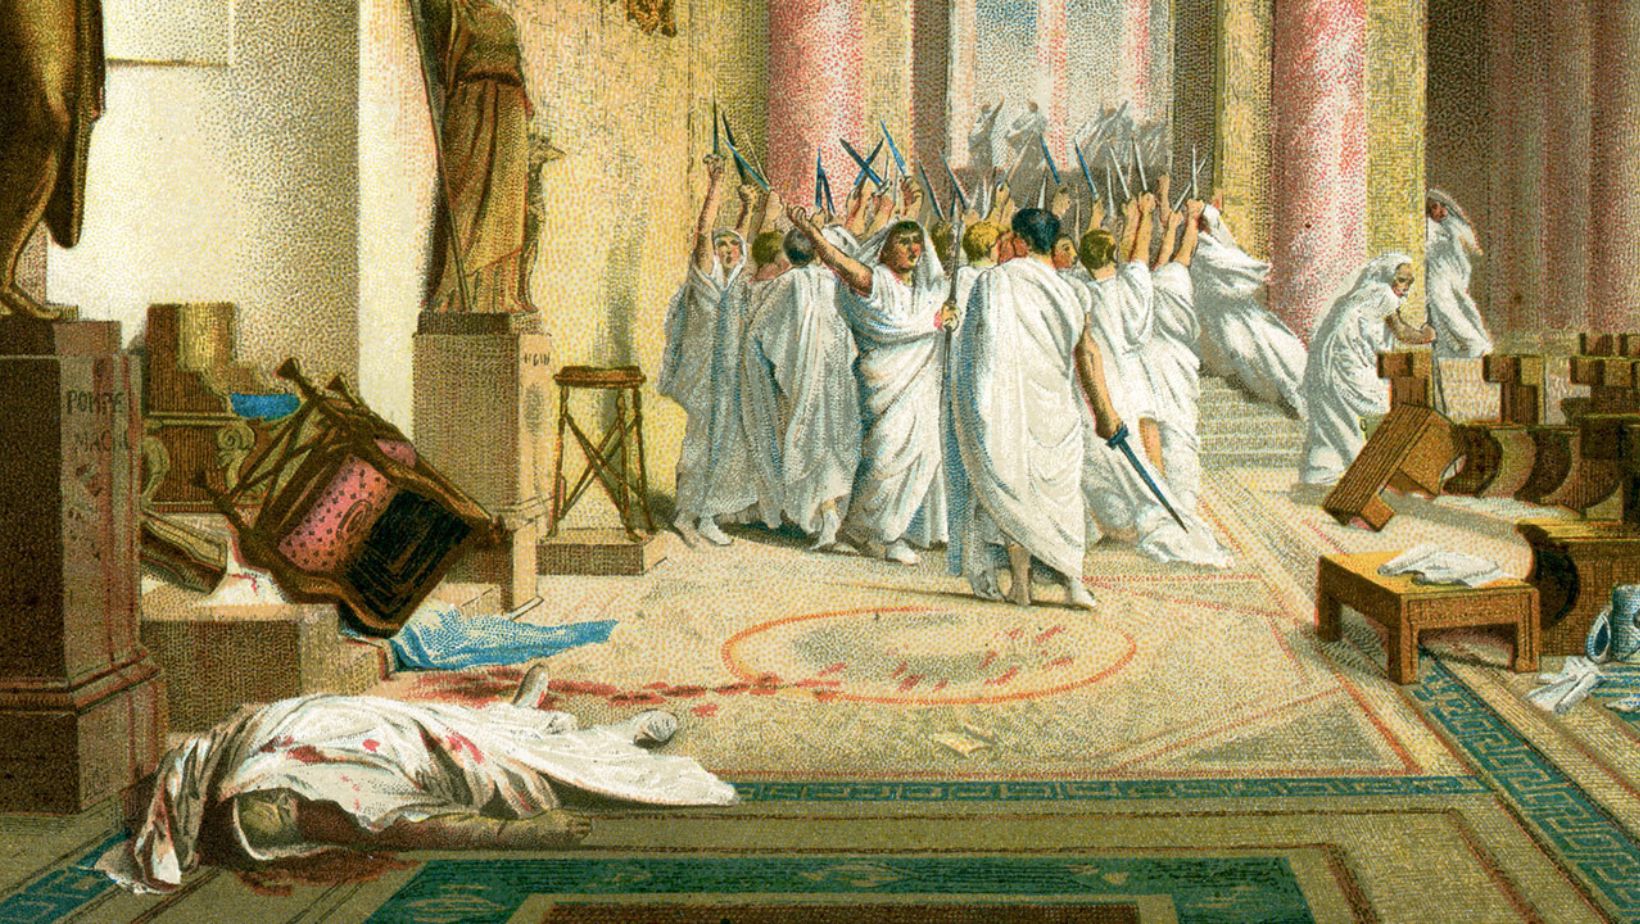 The Ides of March and its Aftermath